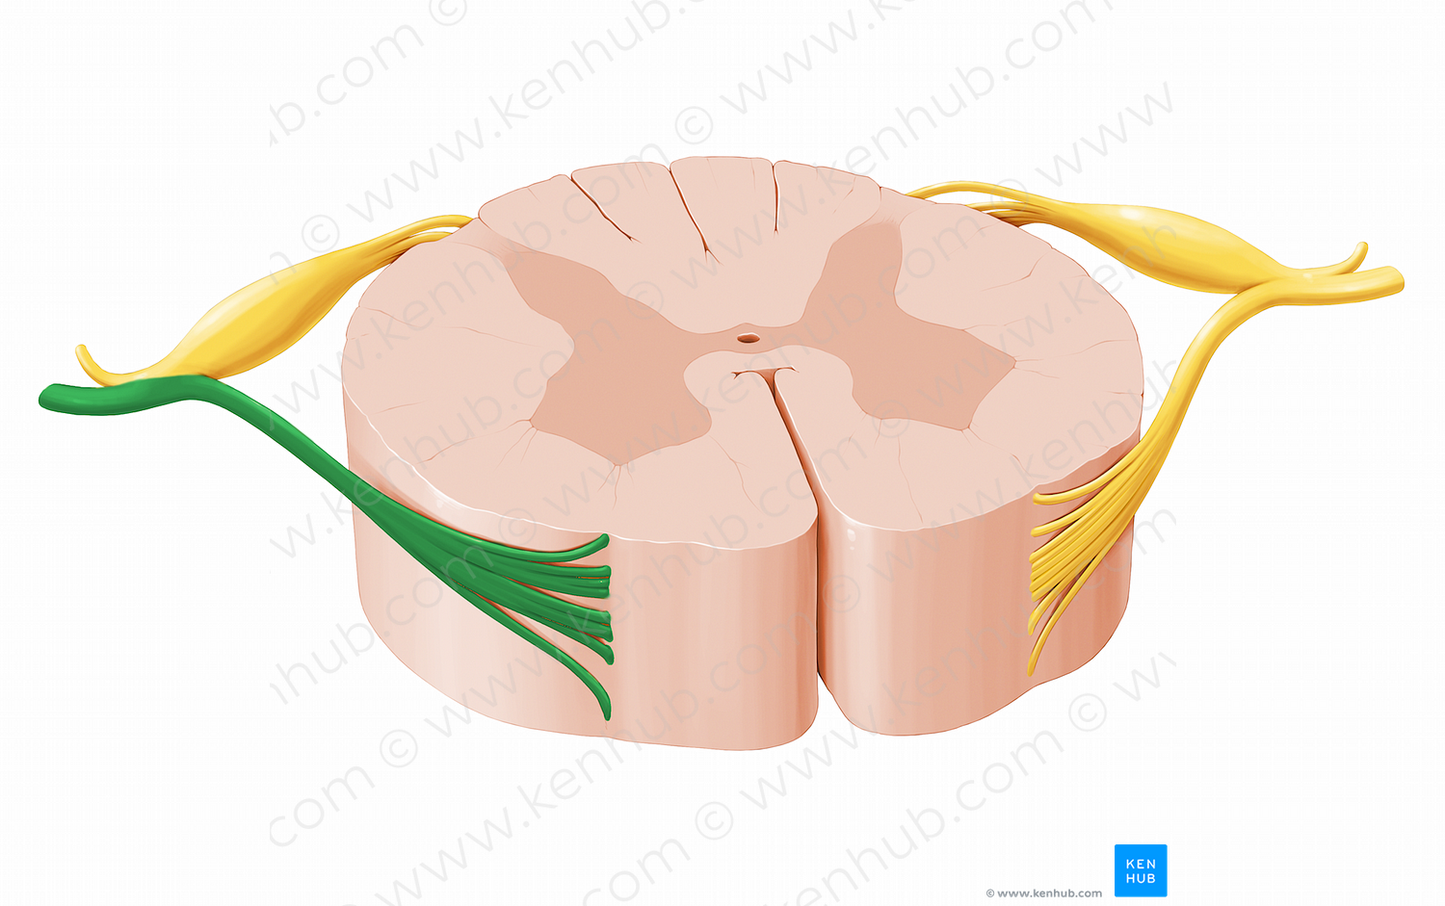 Anterior root of spinal nerve (#12066)